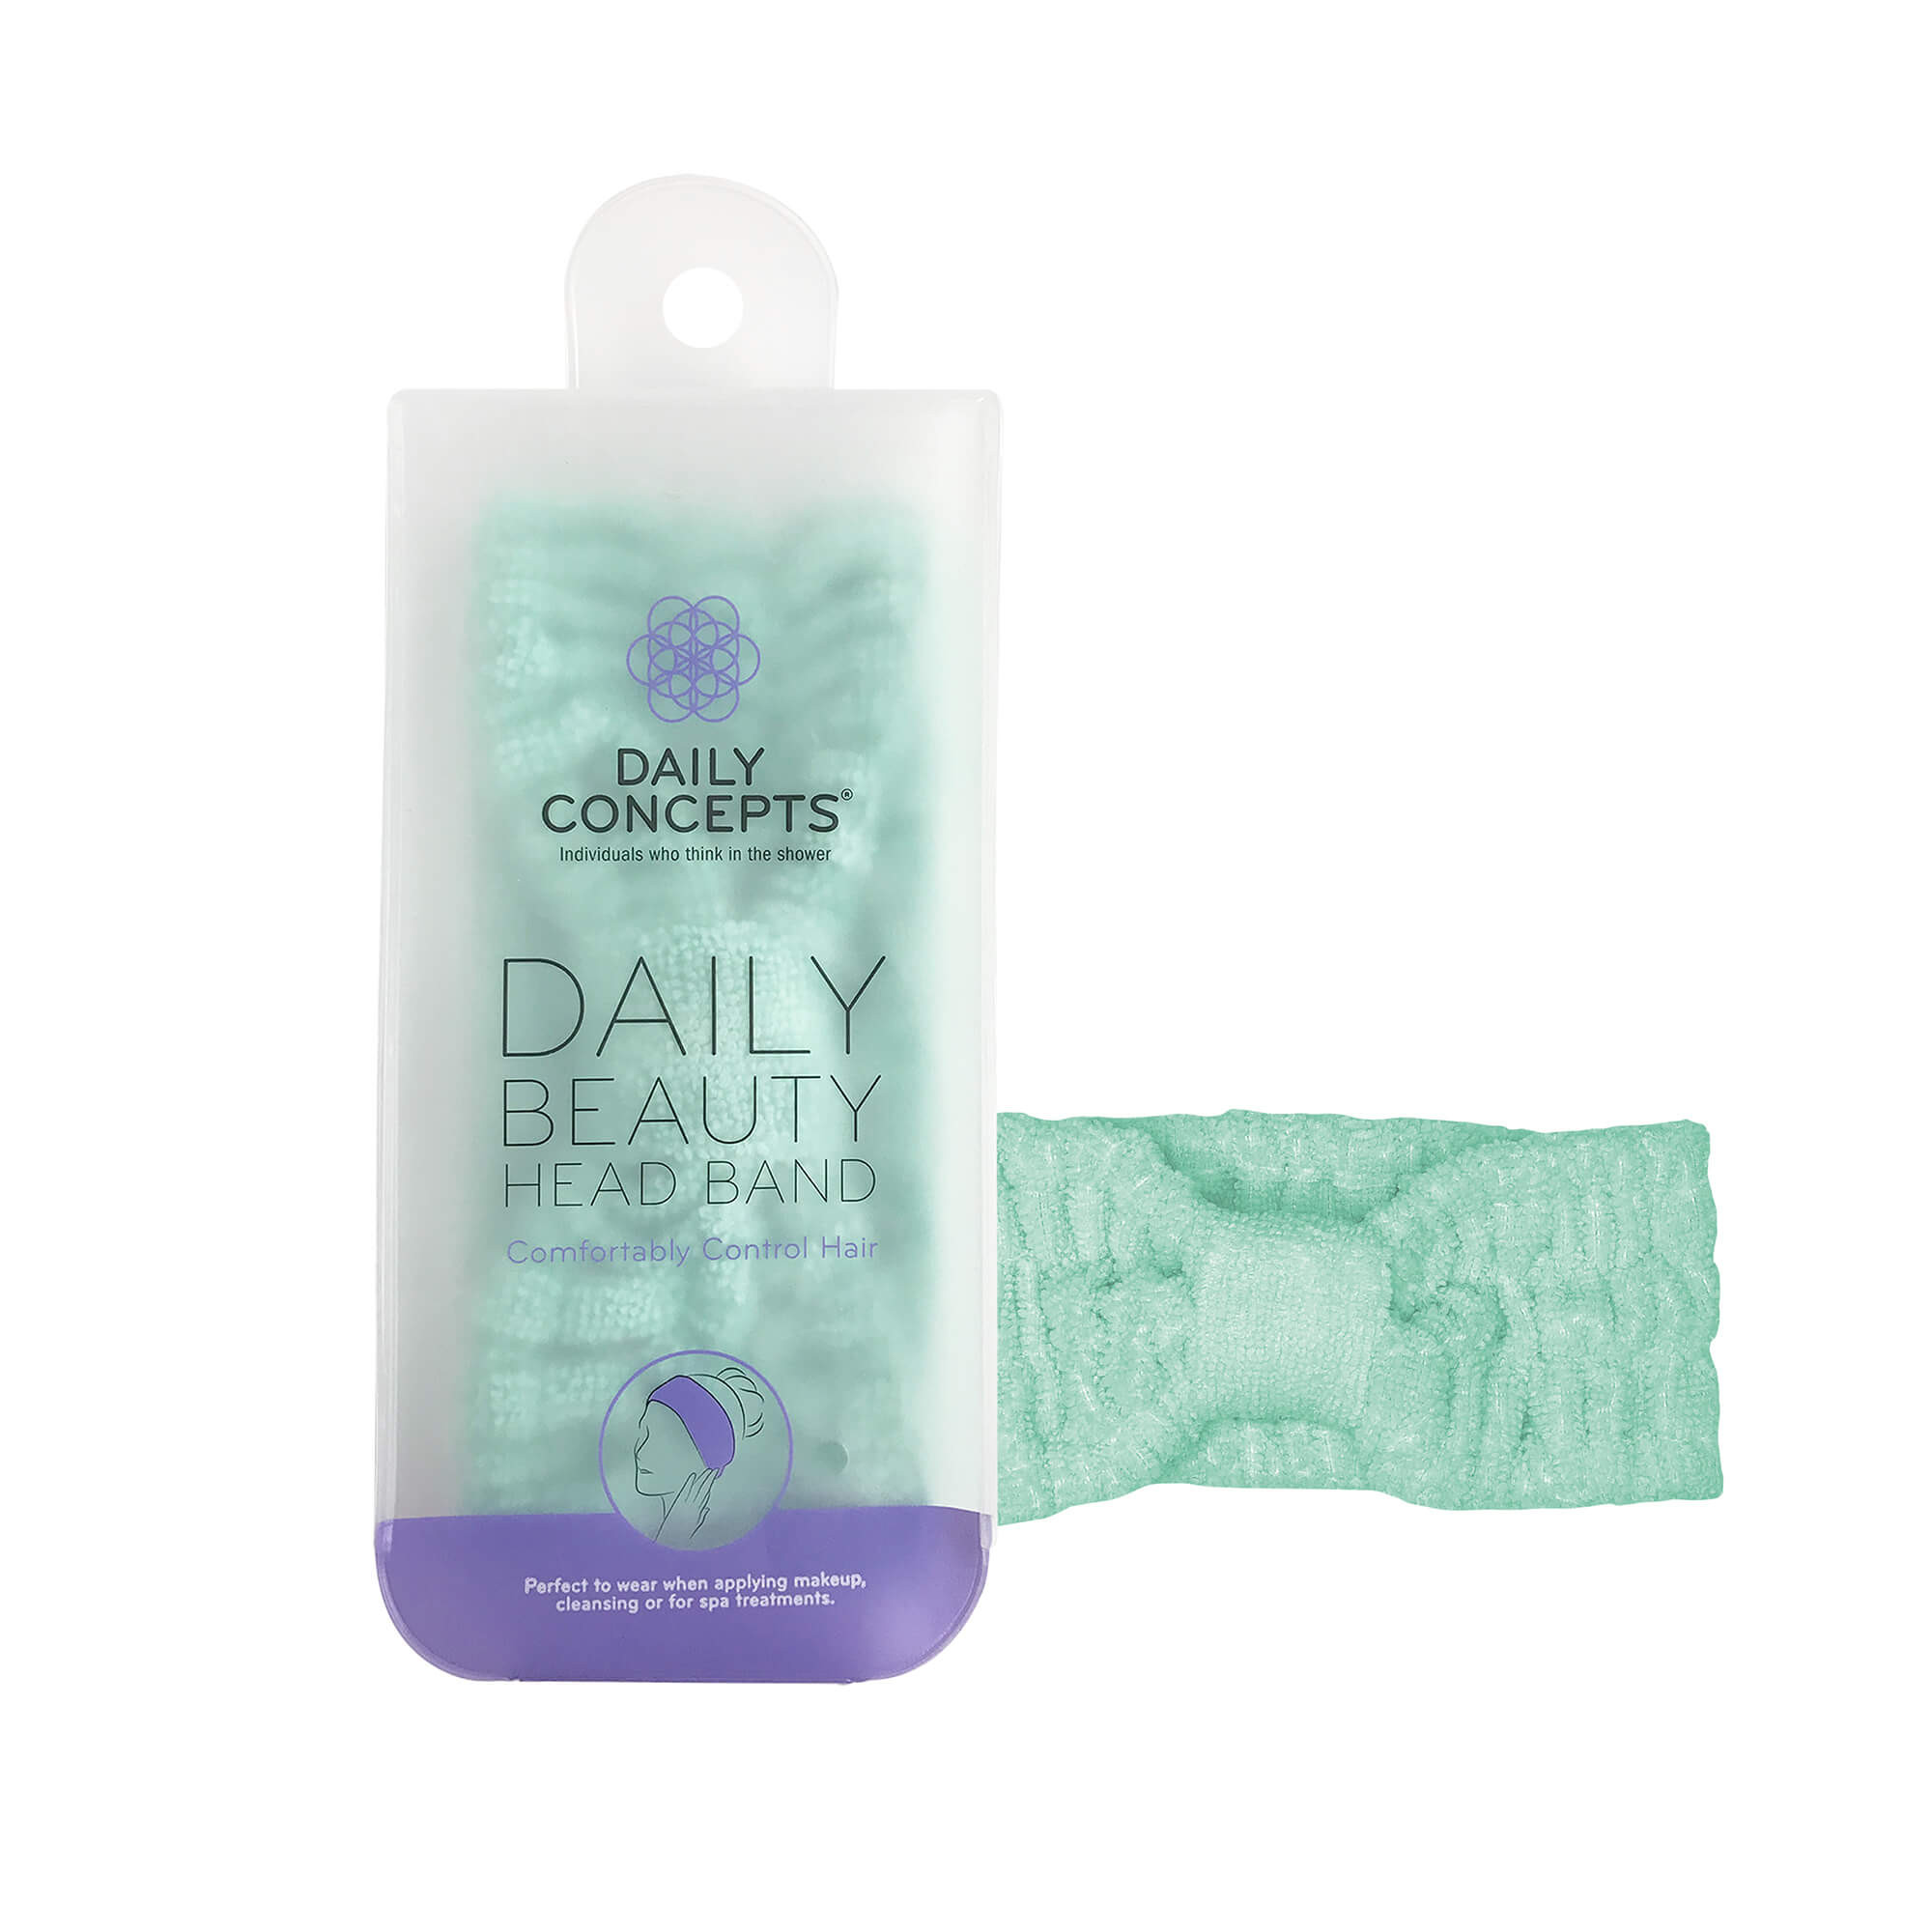 Daily Beauty Headband by Daily Concepts luxury Spa goods – DAILY